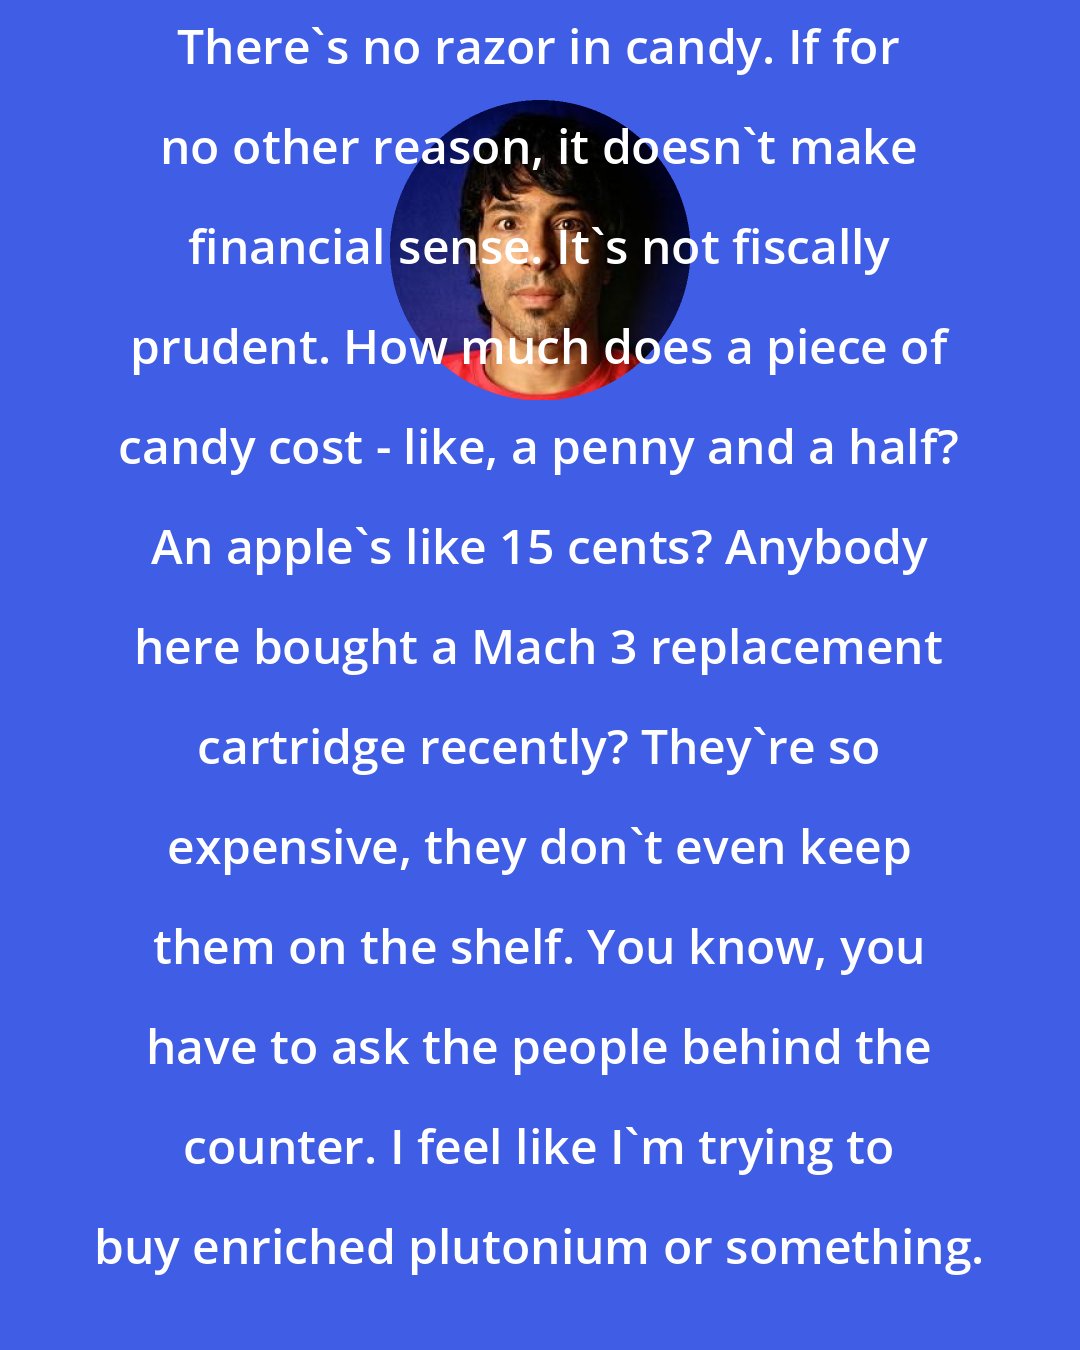 Arj Barker: There's no razor in candy. If for no other reason, it doesn't make financial sense. It's not fiscally prudent. How much does a piece of candy cost - like, a penny and a half? An apple's like 15 cents? Anybody here bought a Mach 3 replacement cartridge recently? They're so expensive, they don't even keep them on the shelf. You know, you have to ask the people behind the counter. I feel like I'm trying to buy enriched plutonium or something.